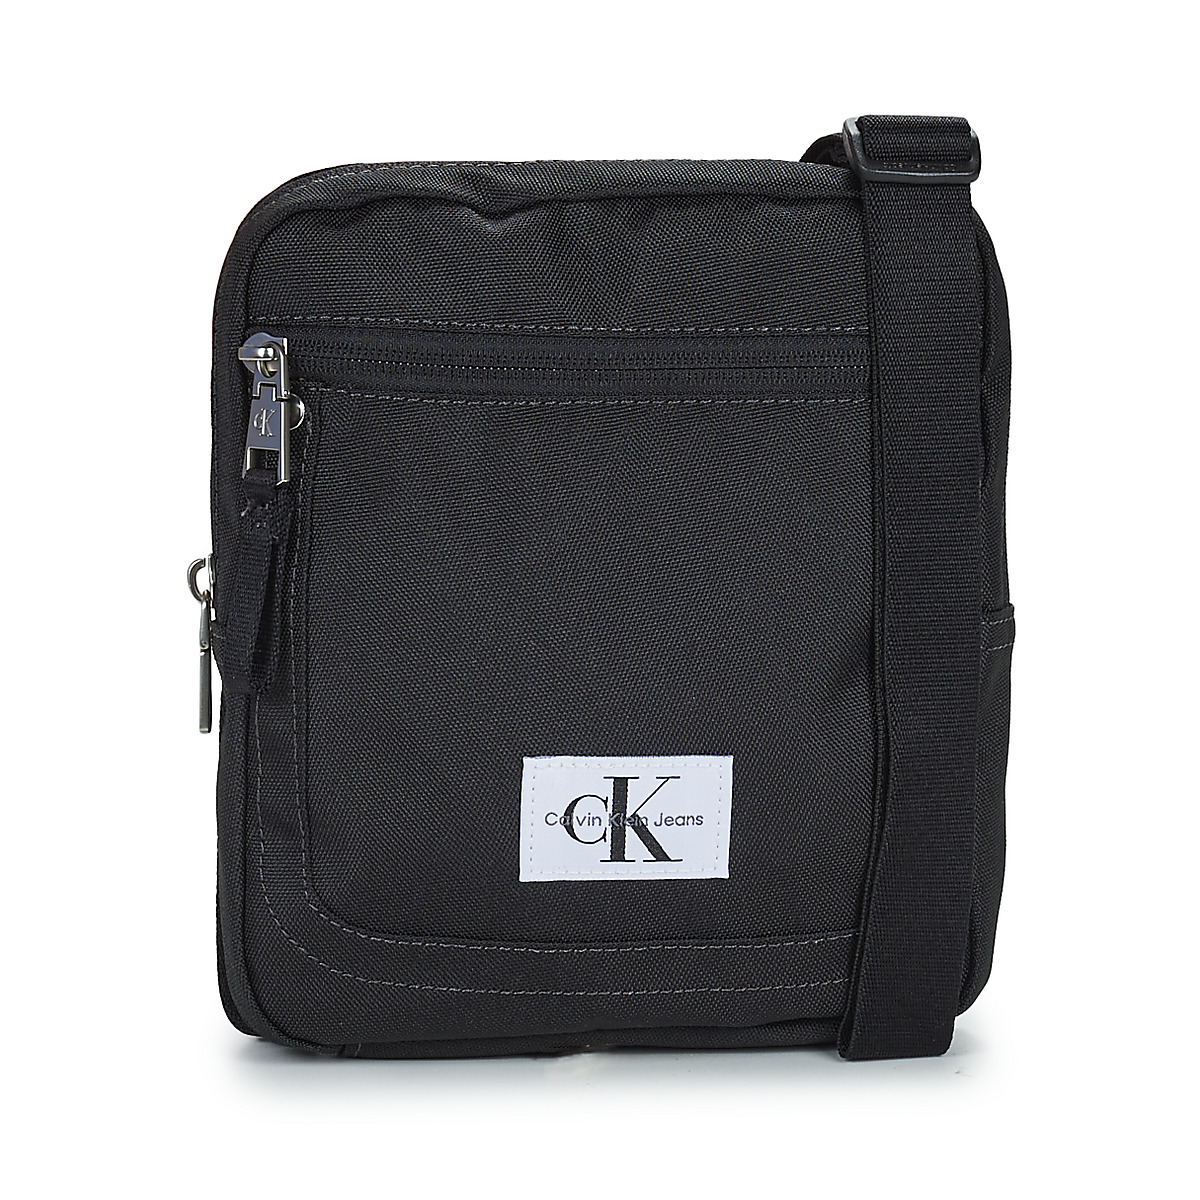 Men ! NET REPORTER18 / Clutches Jeans delivery Pouches | SPORT - Free Calvin Klein Bags ESSENTIALS - Spartoo W Black